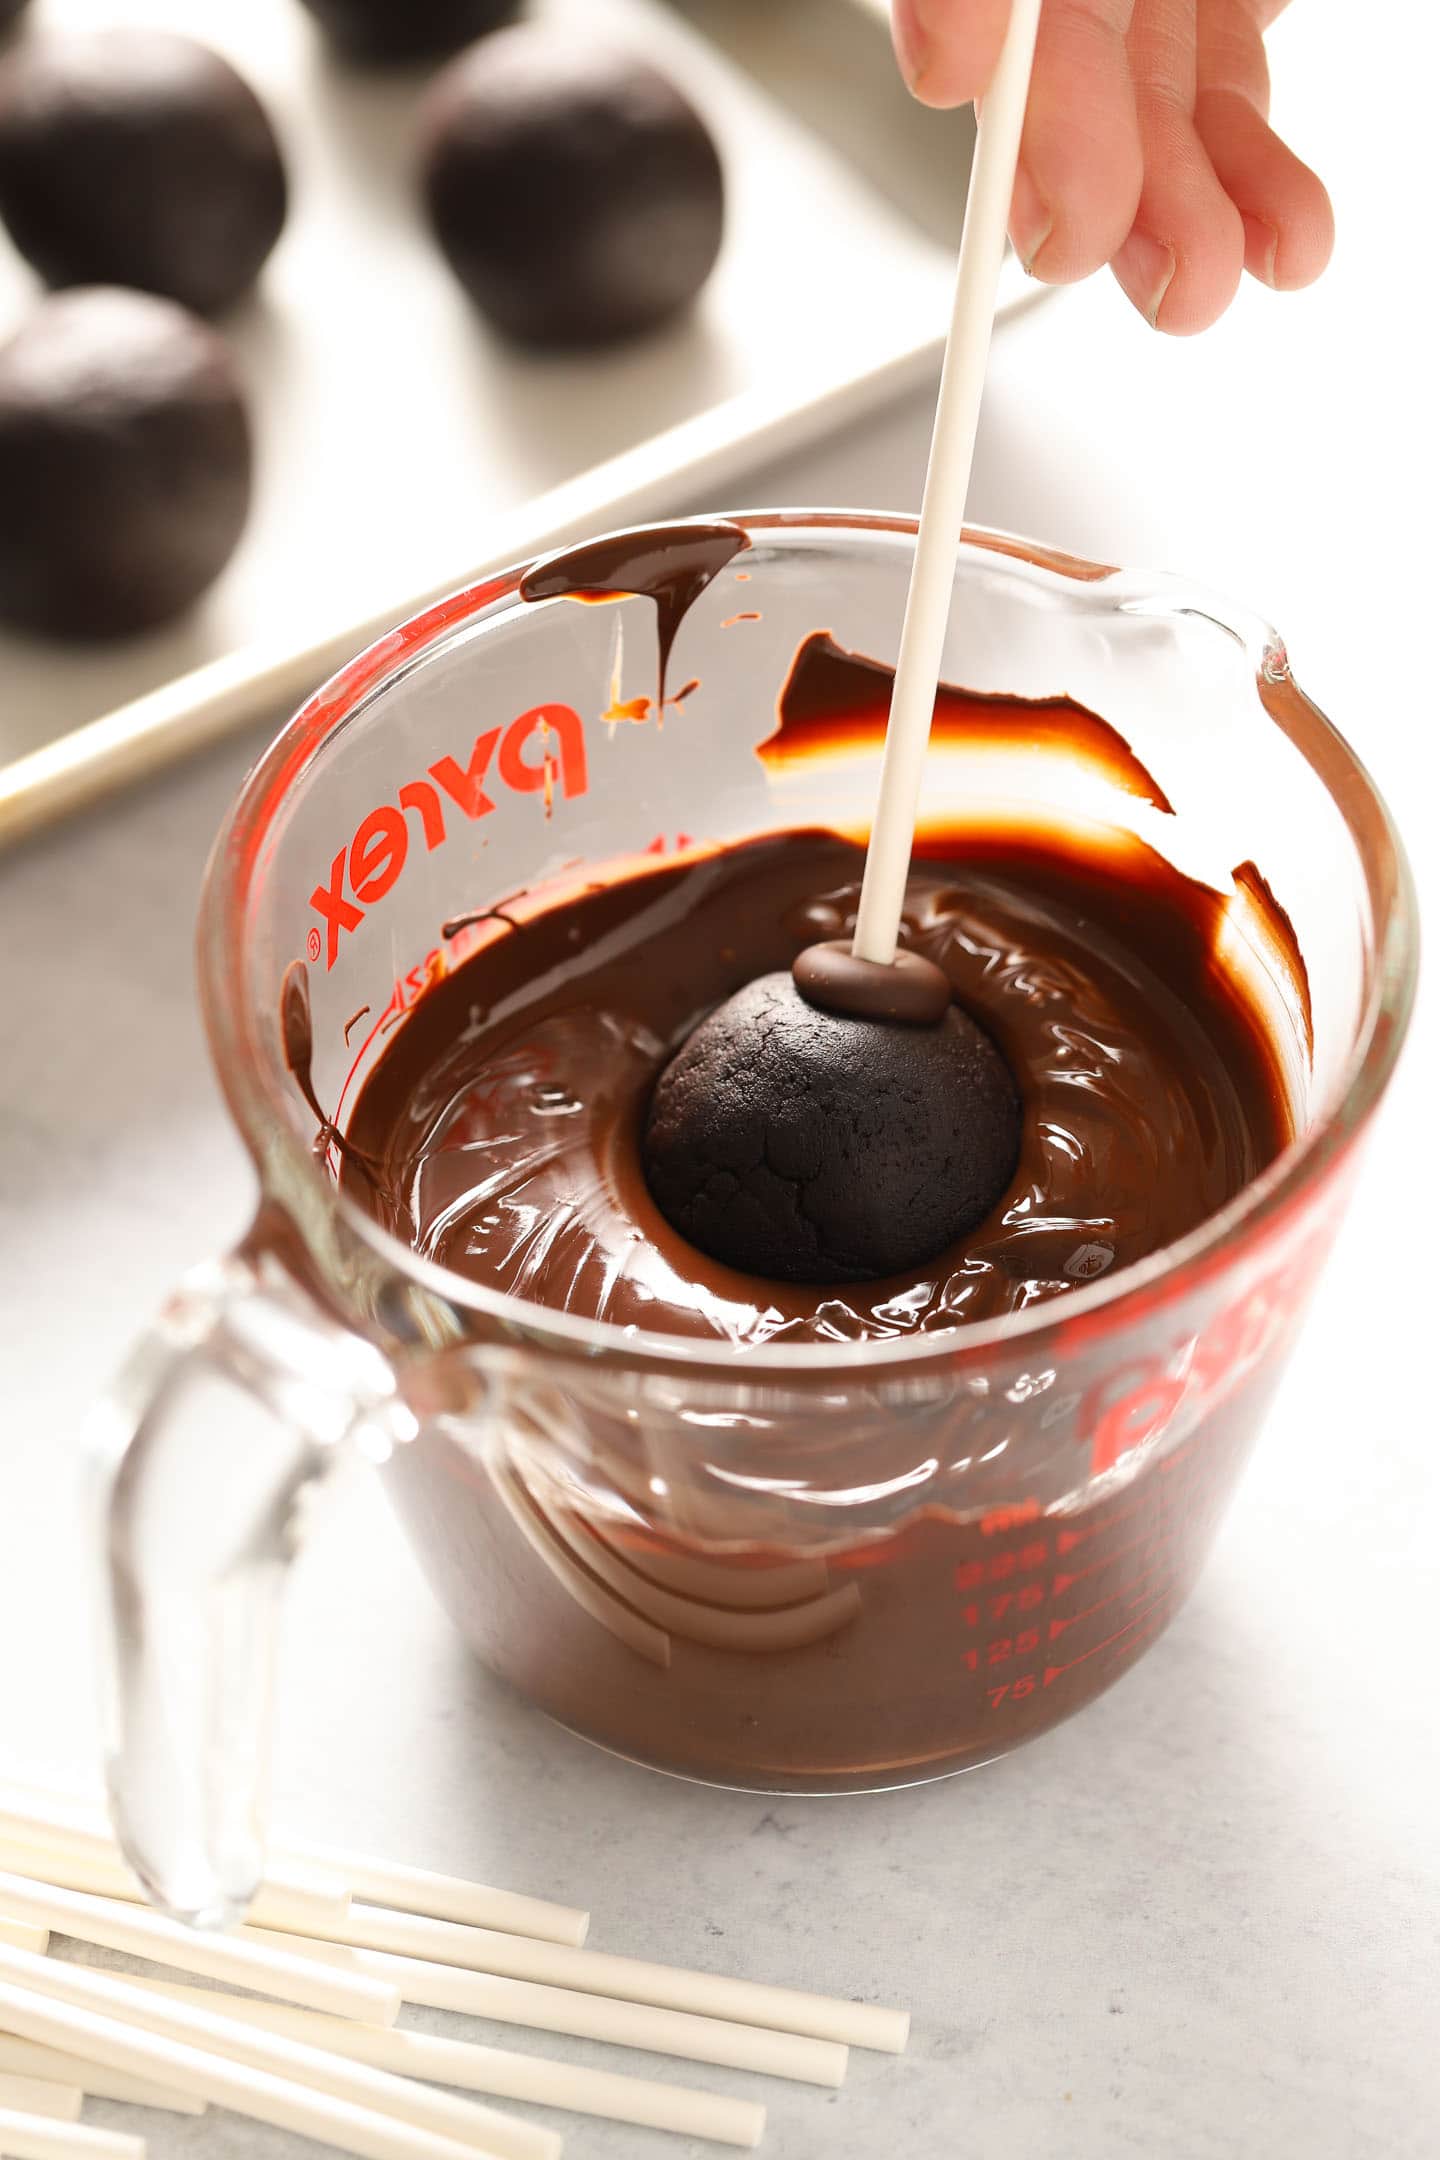 a cake pop being dipped into a cup of melted chocolate